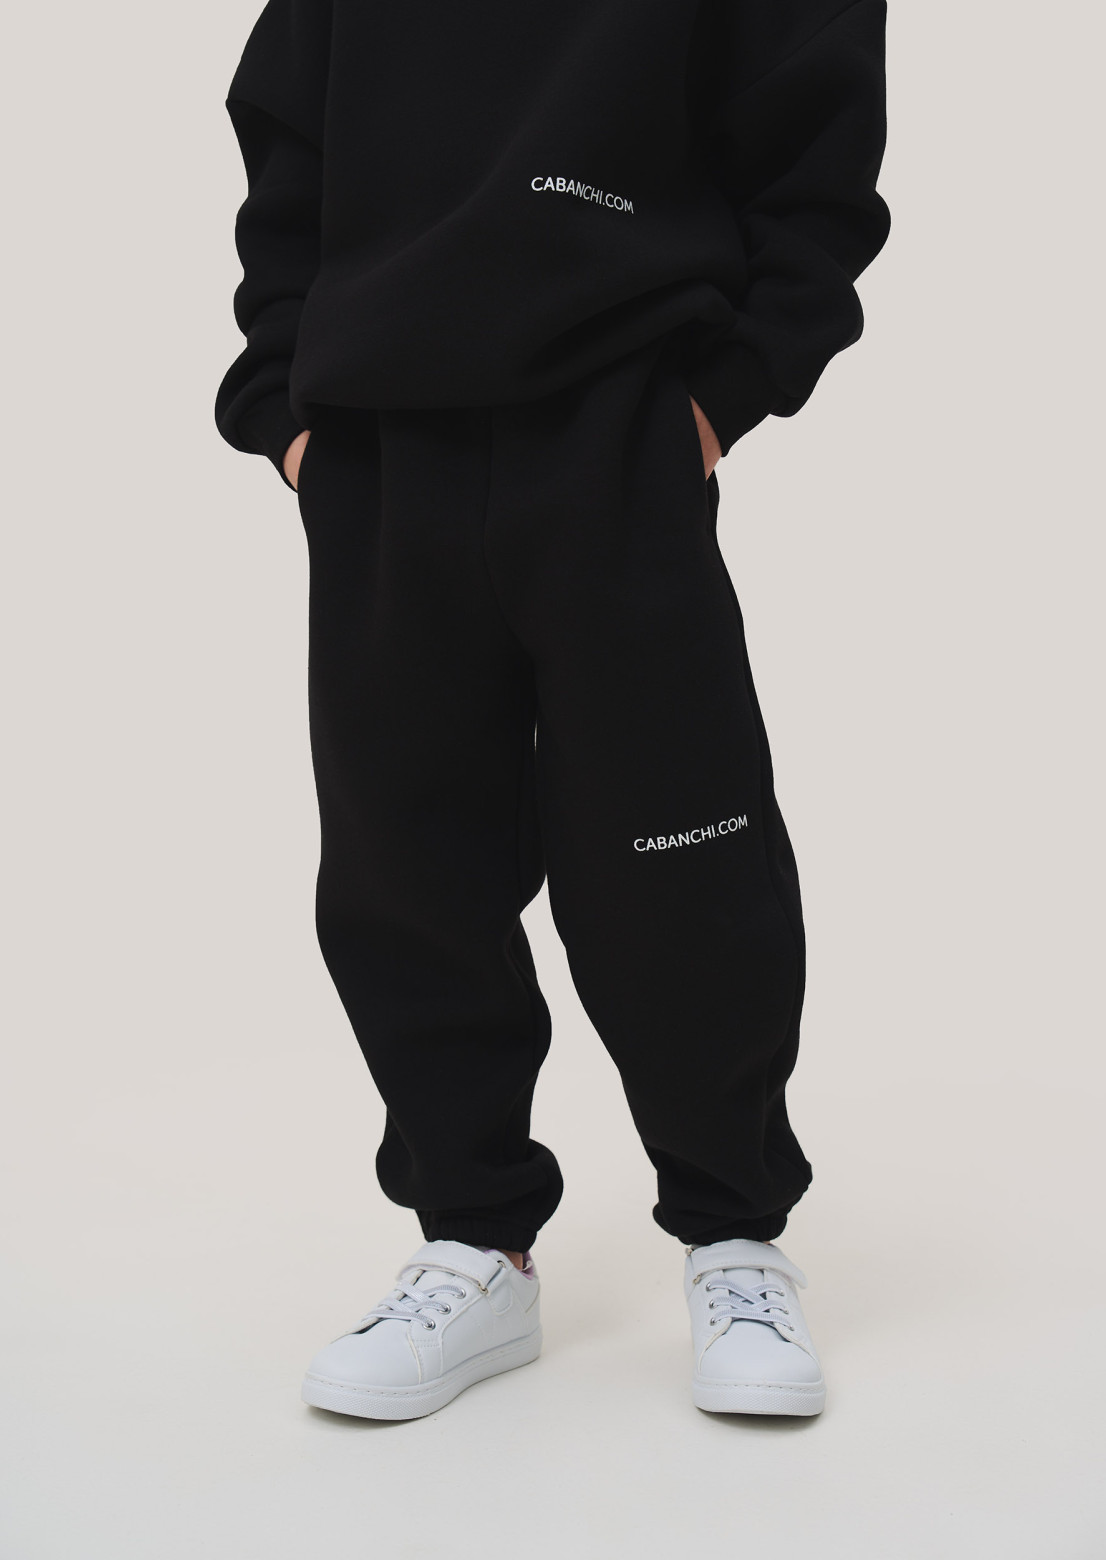 Black color kids three-thread insulated oversize trousers with print "Cabanchi.com"